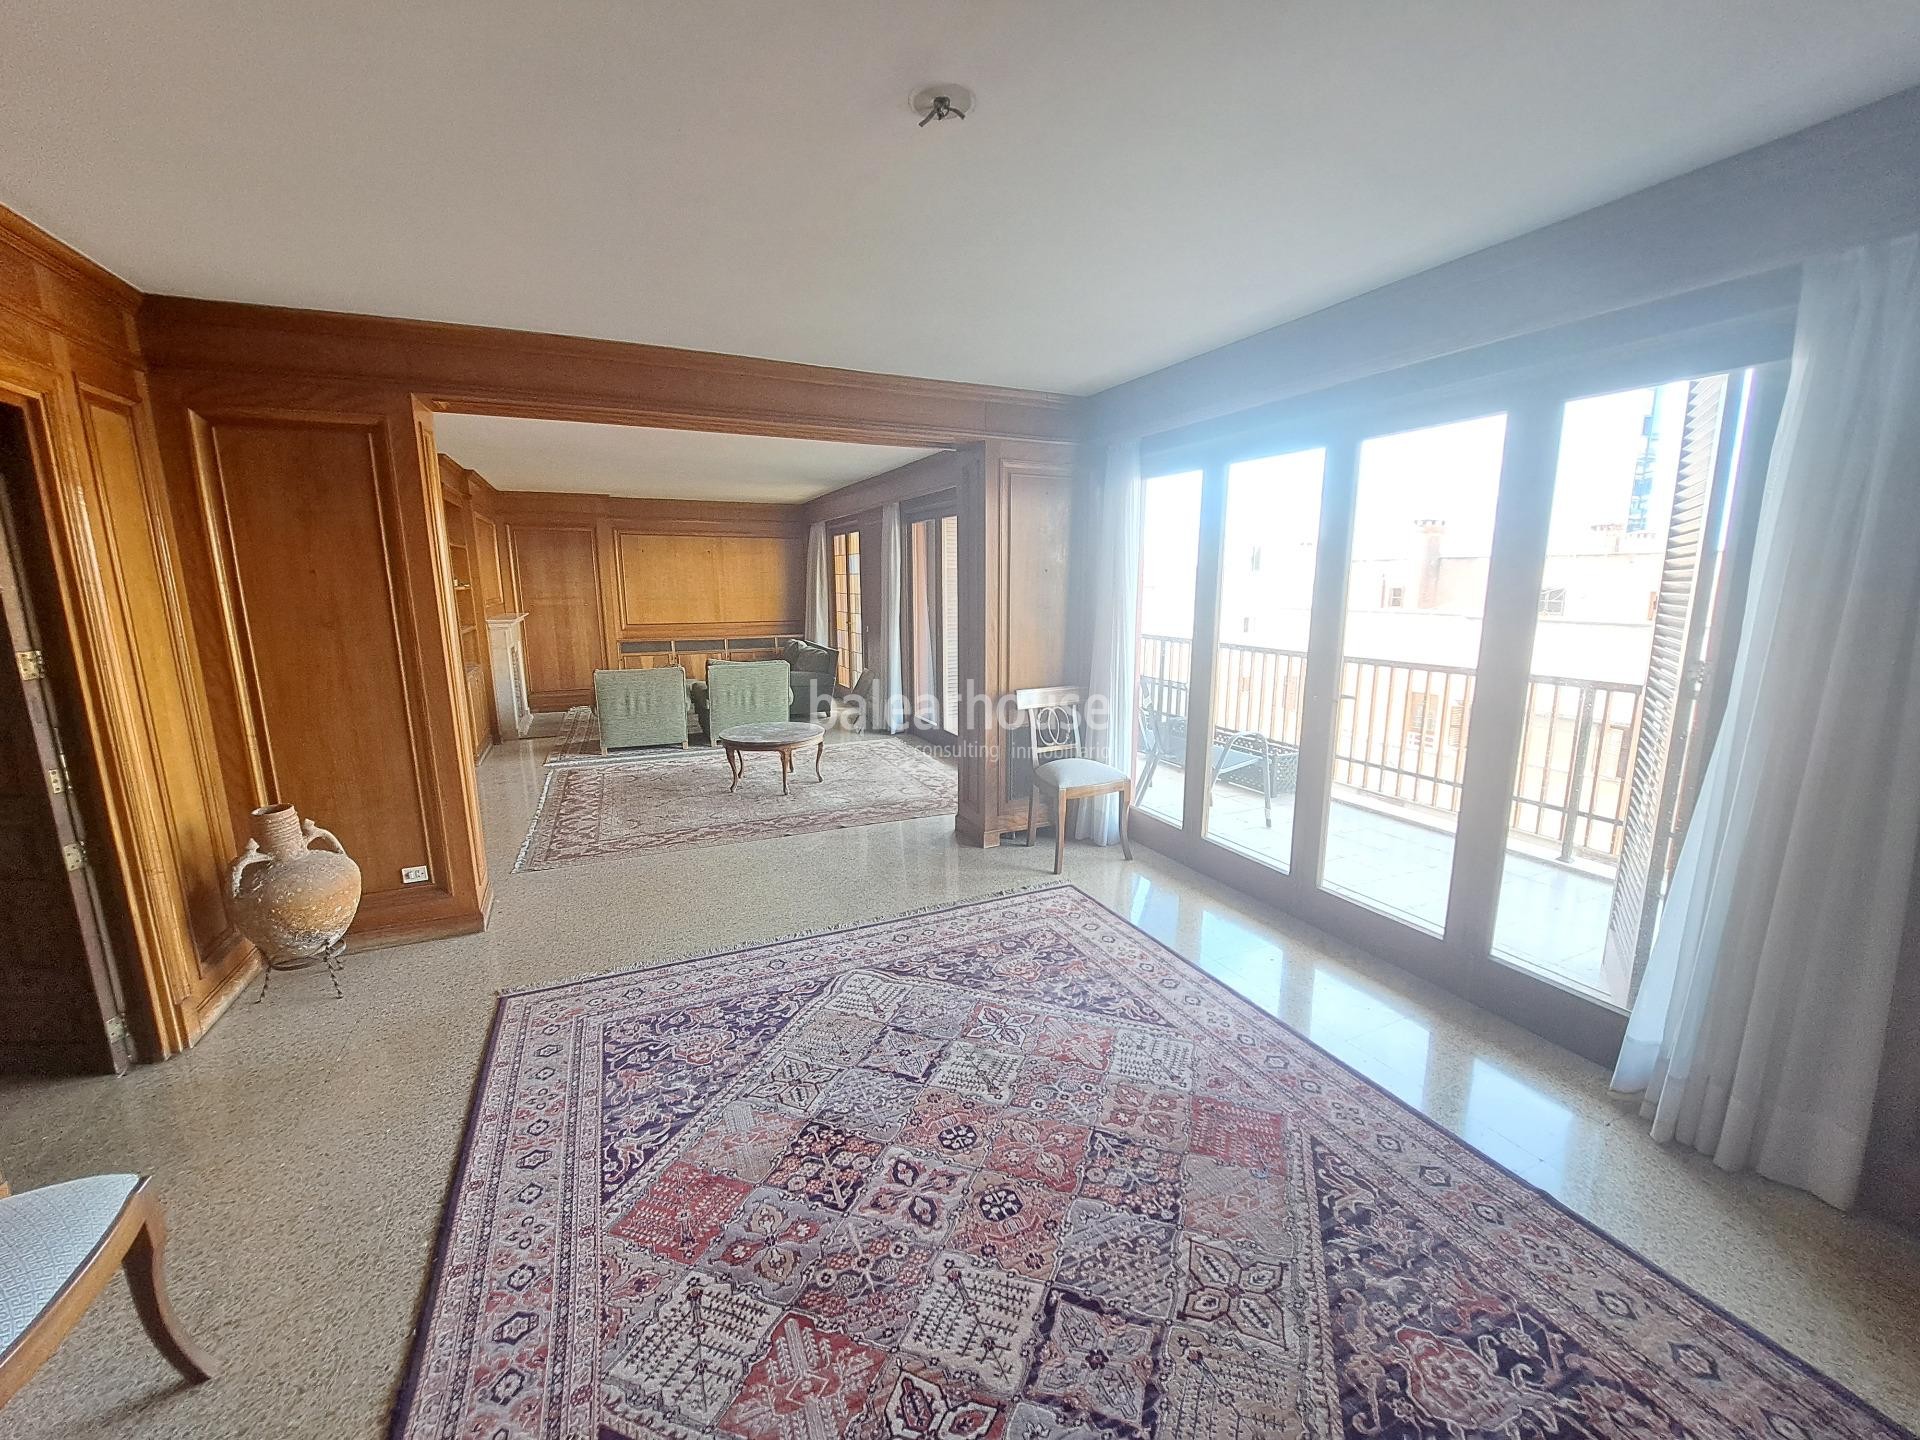 Elegant and spacious apartment next to Paseo Mallorca in the very centre of Palma.